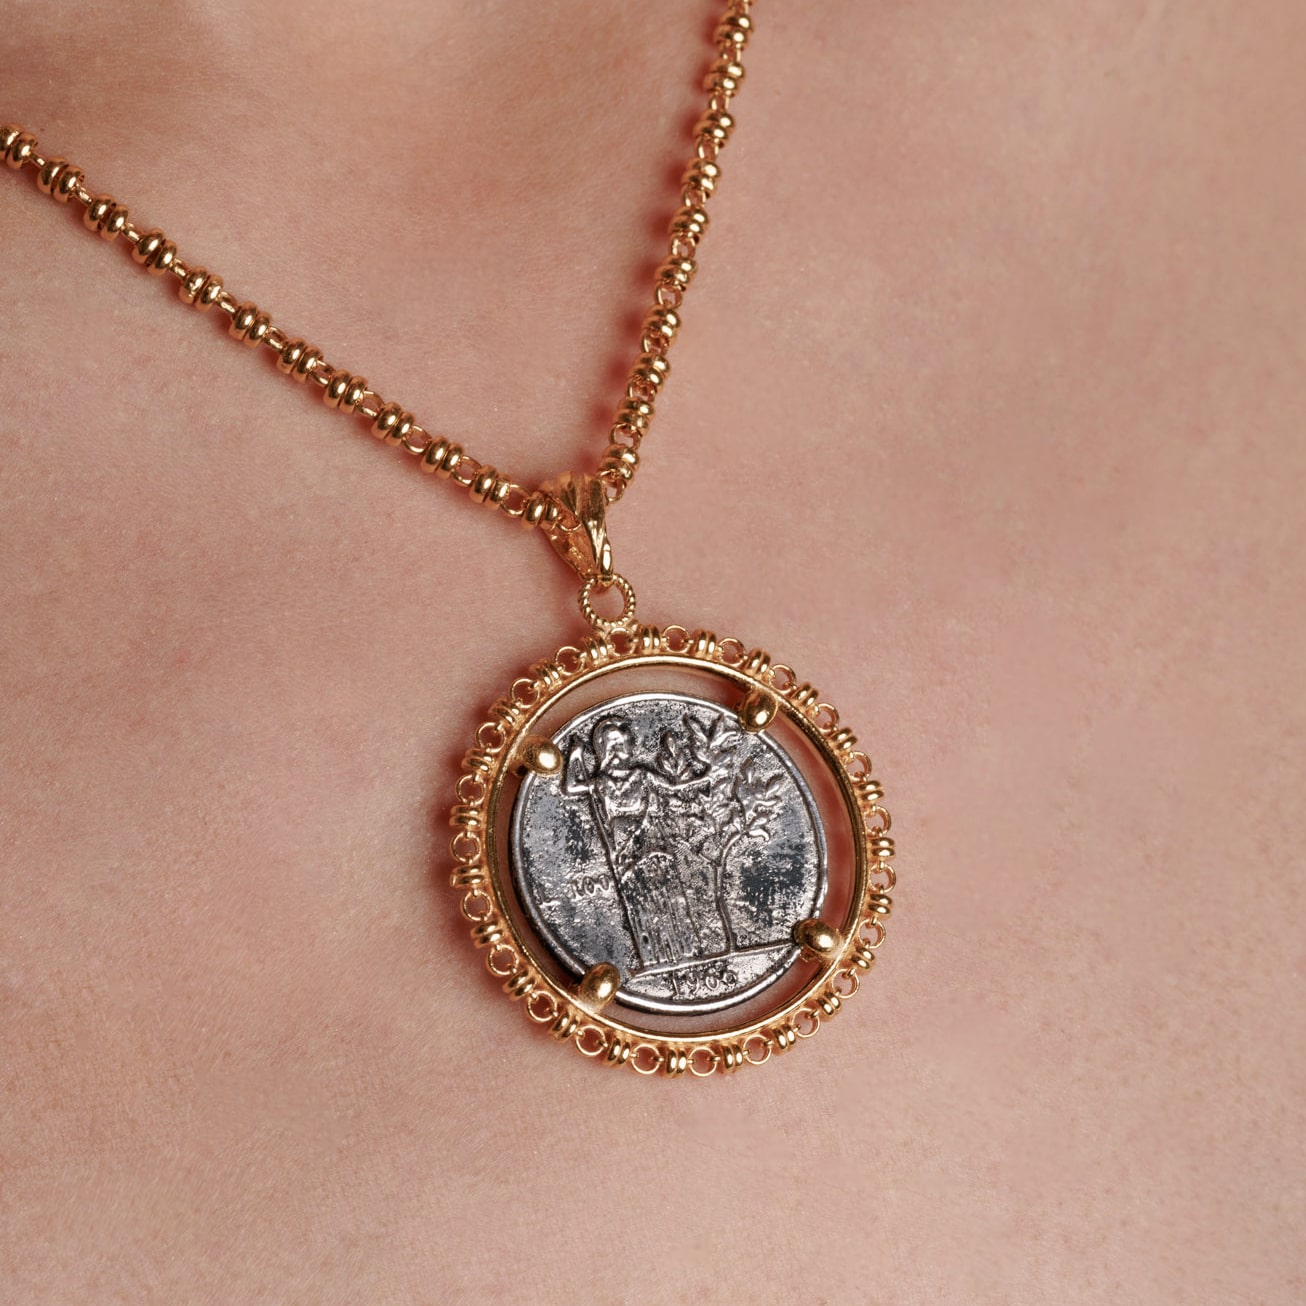 Large Filary Pendant in Gold with Italia Coin in Antique Silver